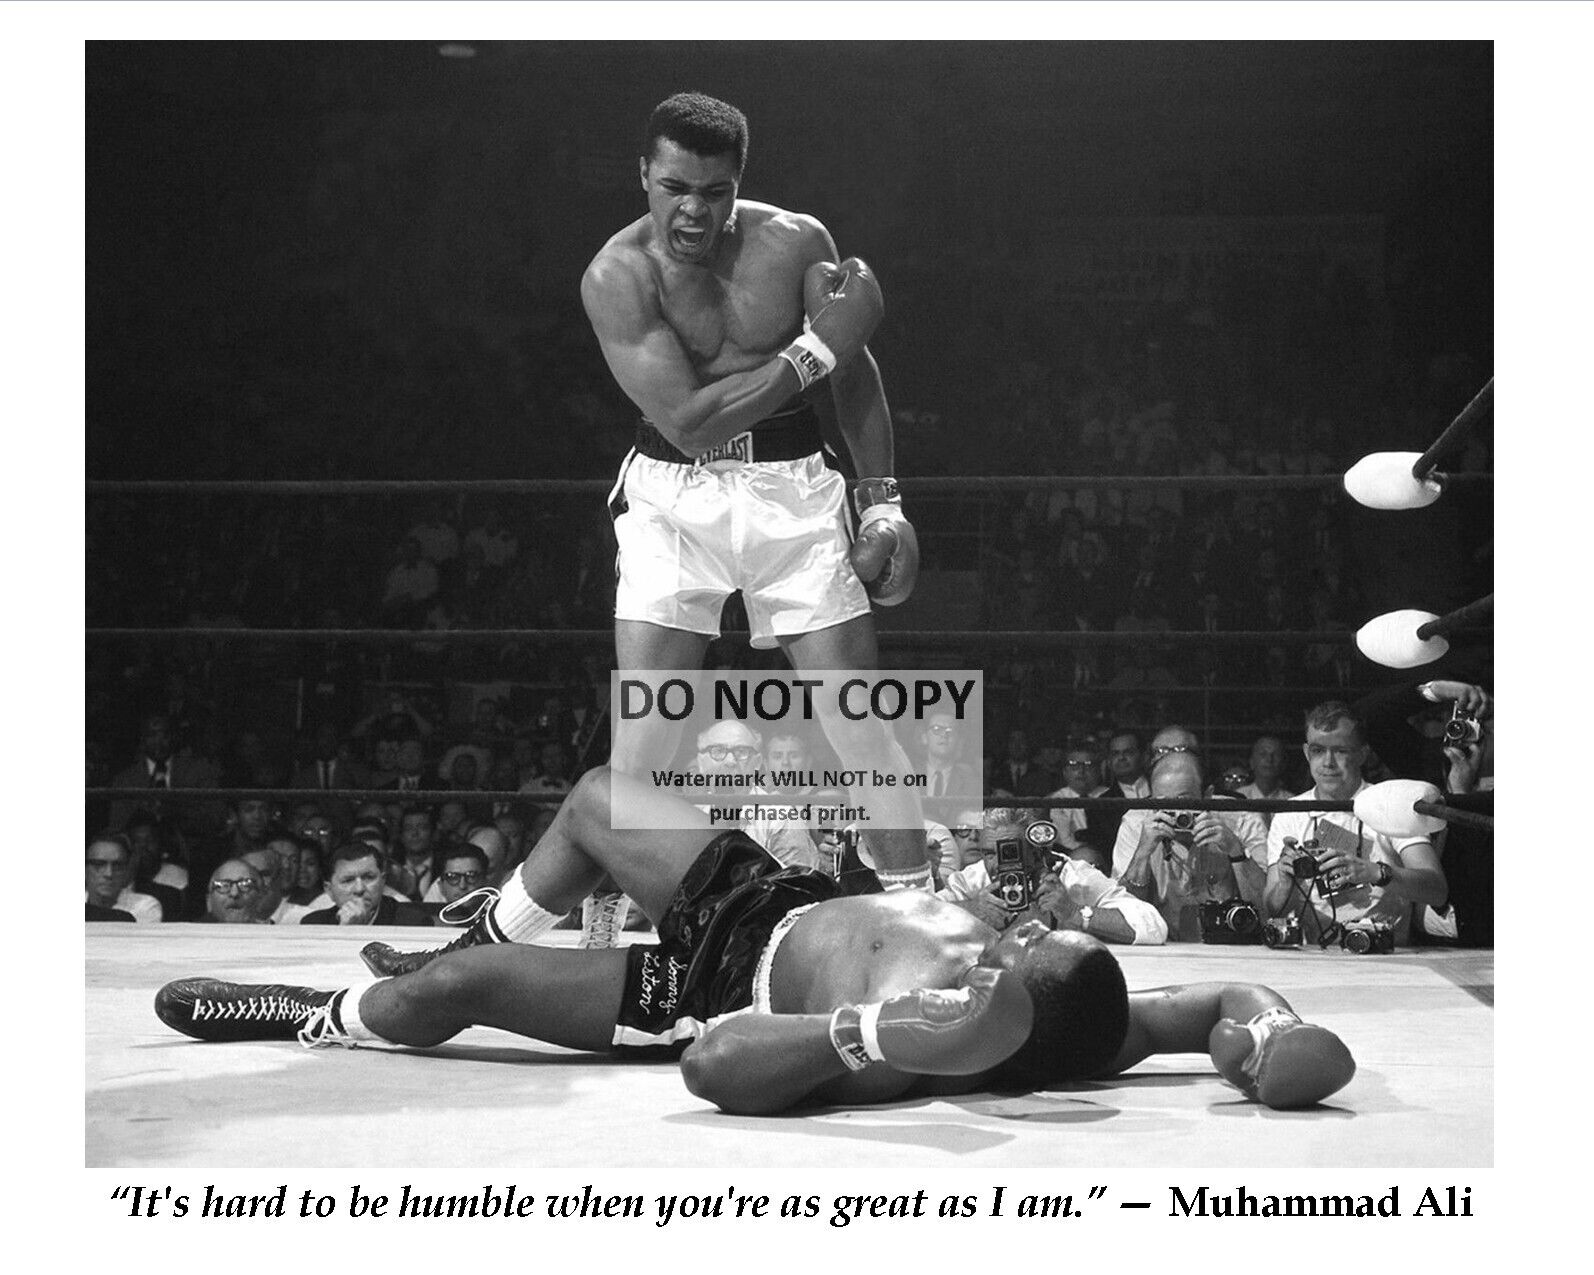 11X14 PHOTO - MUHAMMAD ALI FAMOUS QUOTE FROM BOXING LEGEND (PQ-005)